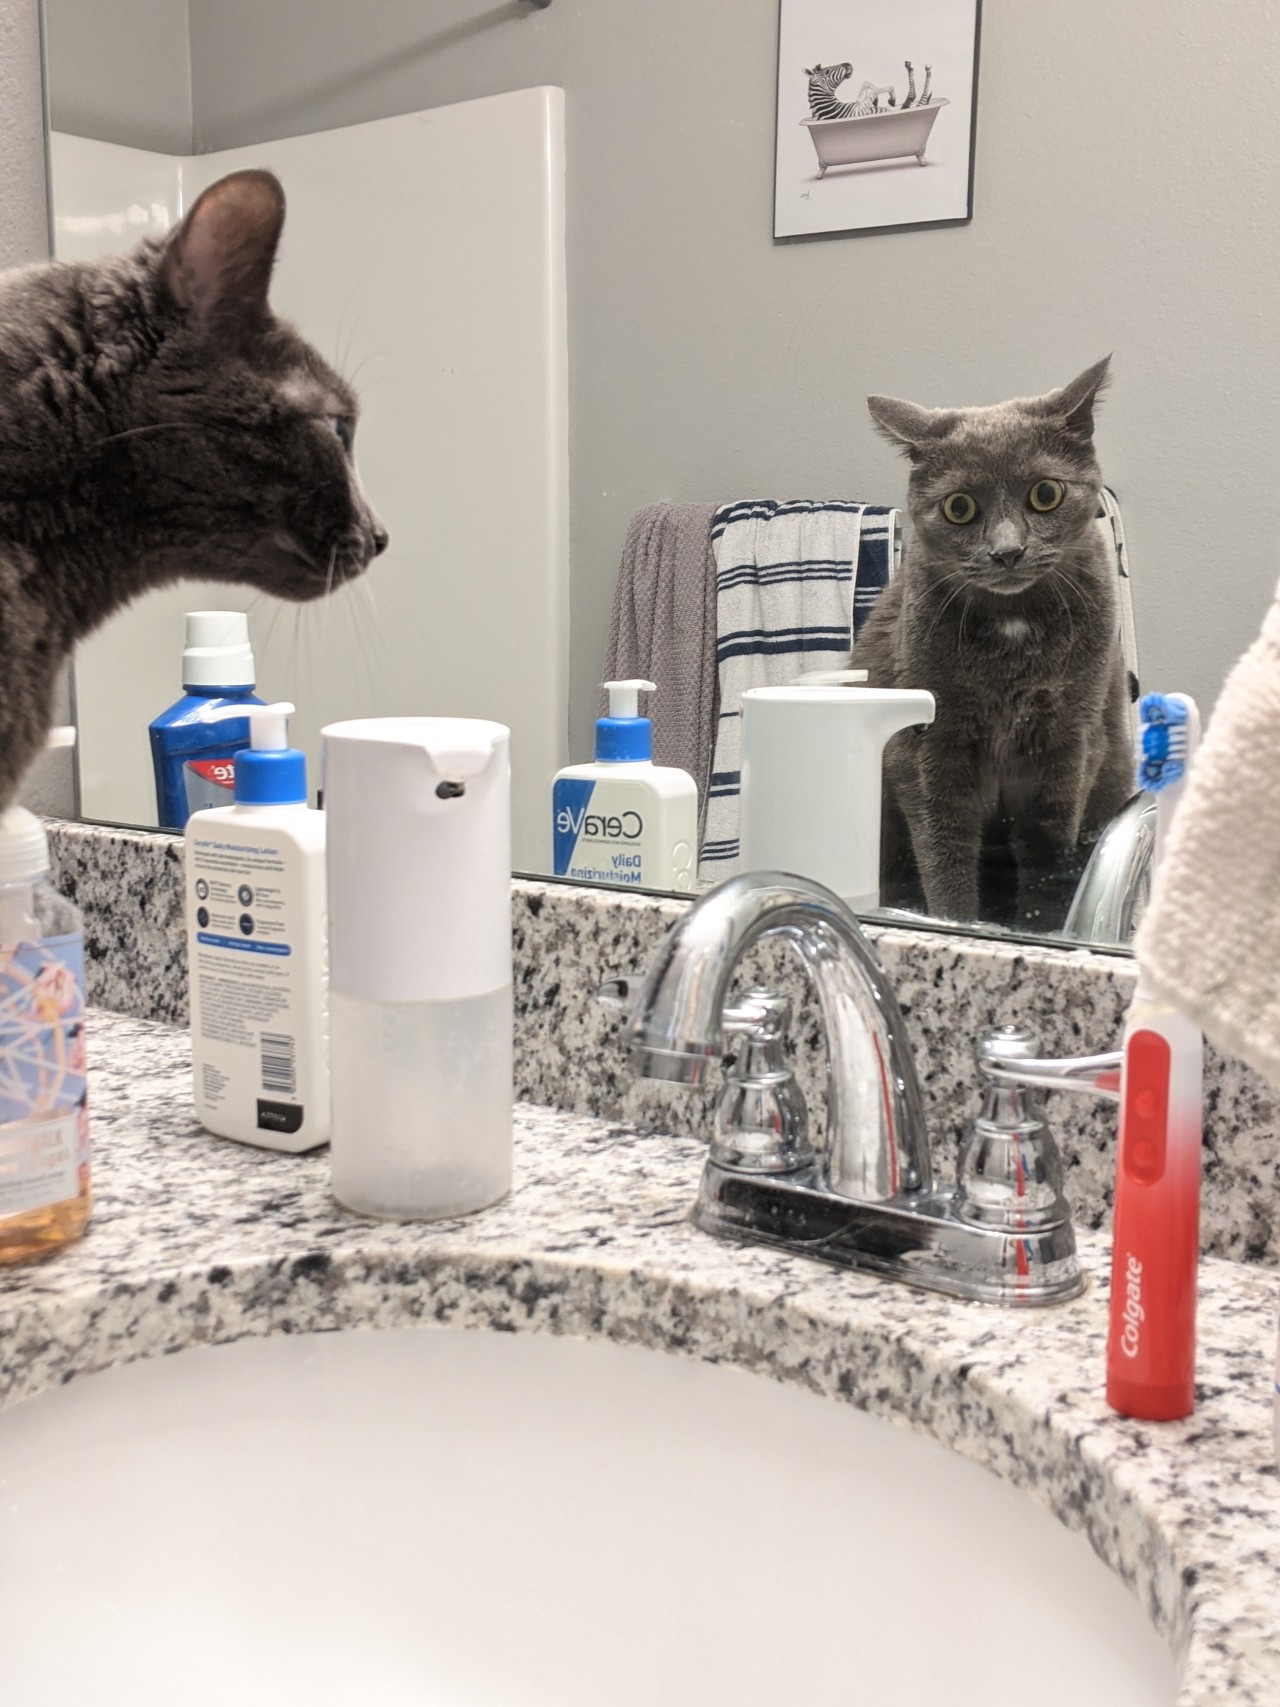 roxas-the-cat:When the you from the mirror dimension is going through some stuff